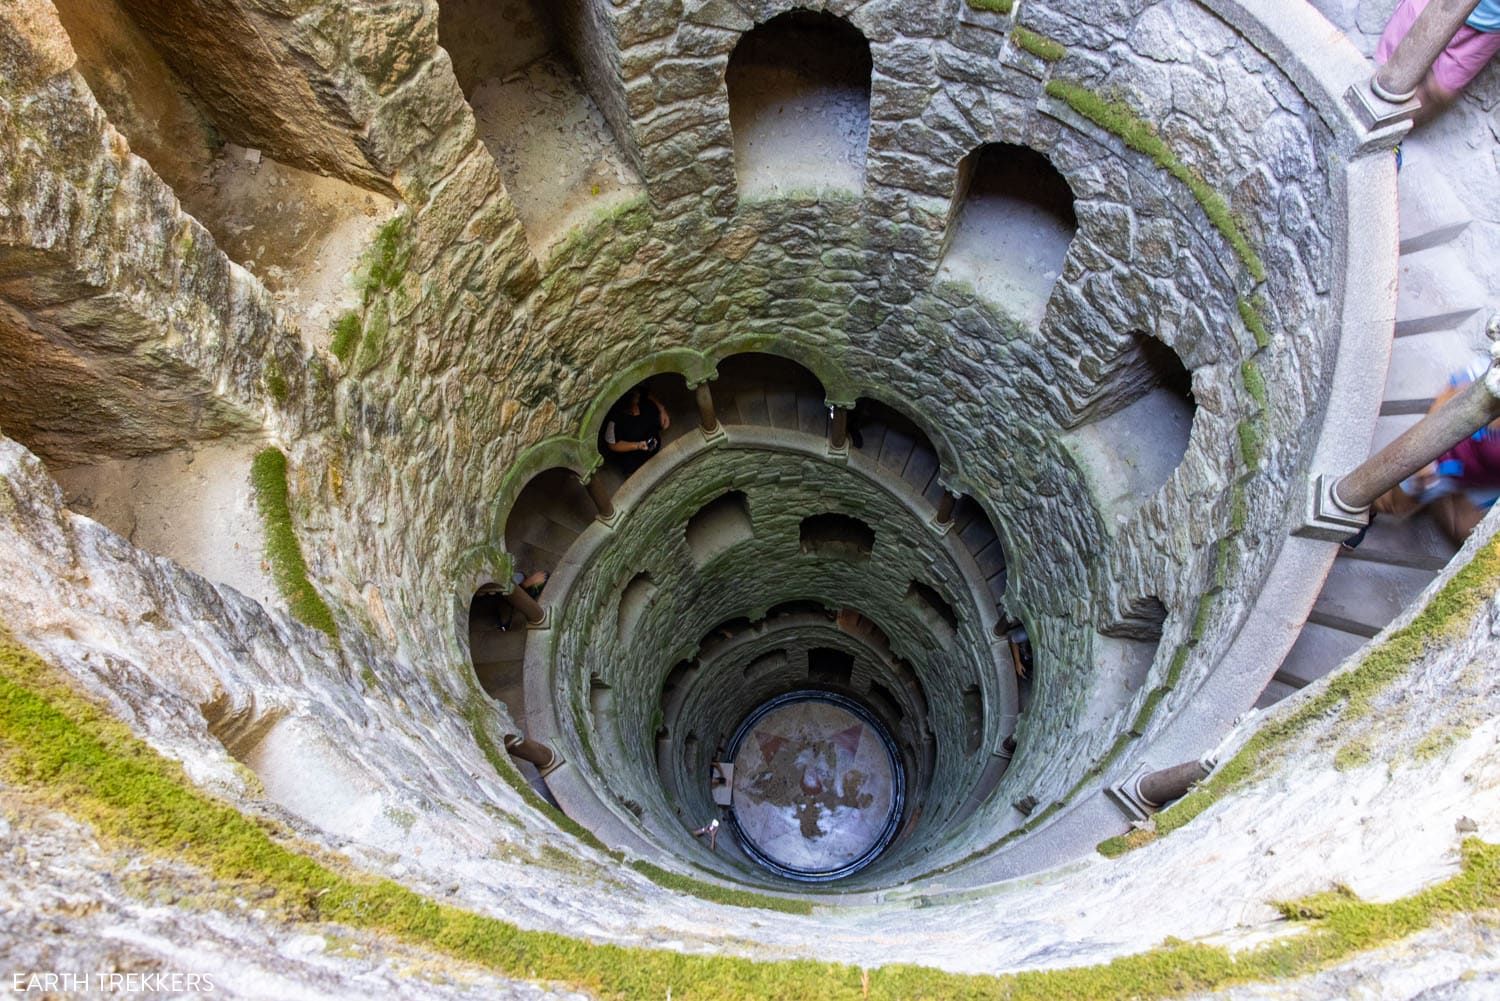 Initiation Well Sintra Portugal | Best things to do in Portugal